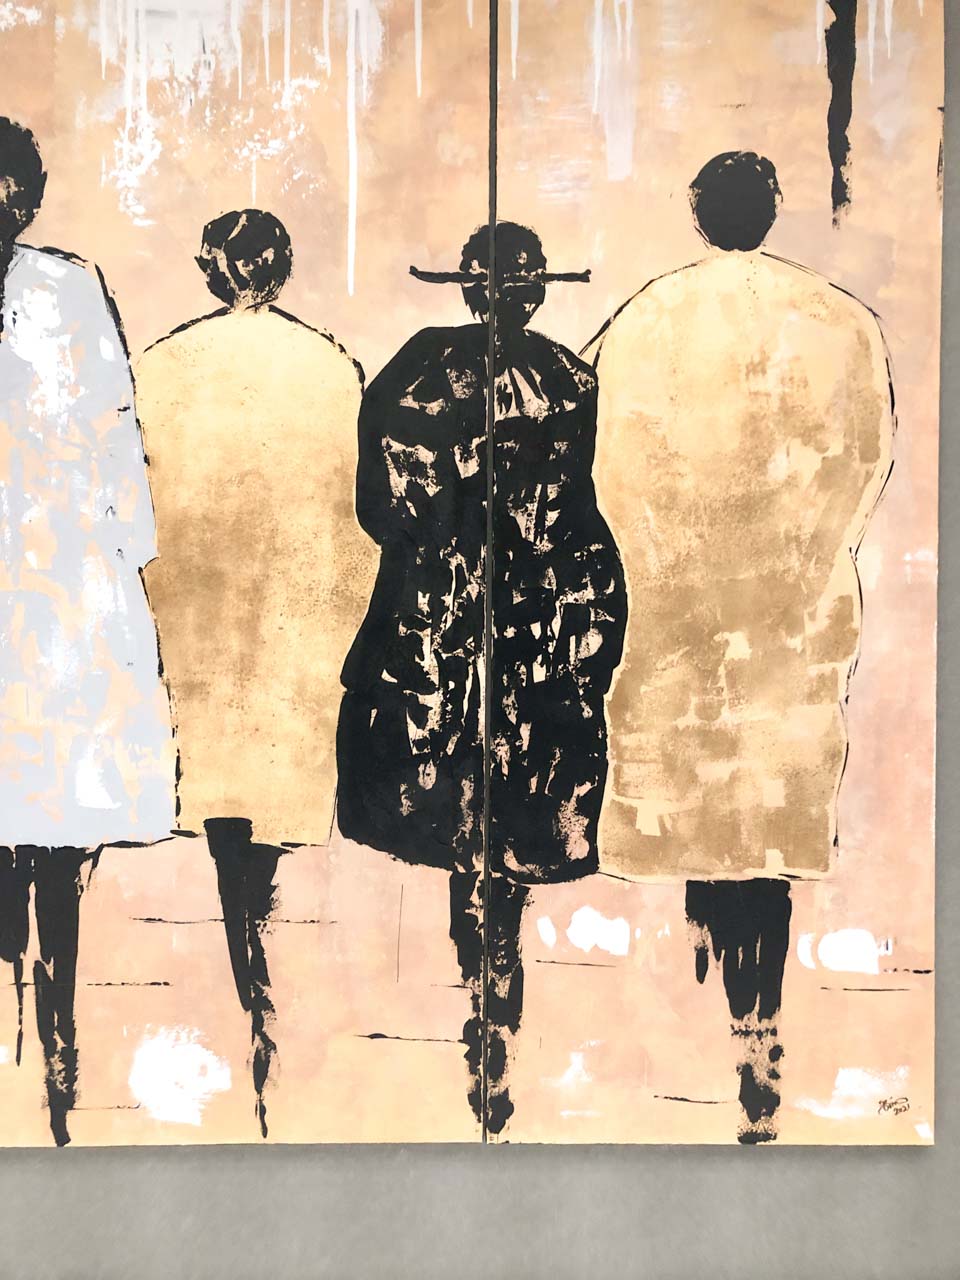 Female silhouettes painted on a golden wall